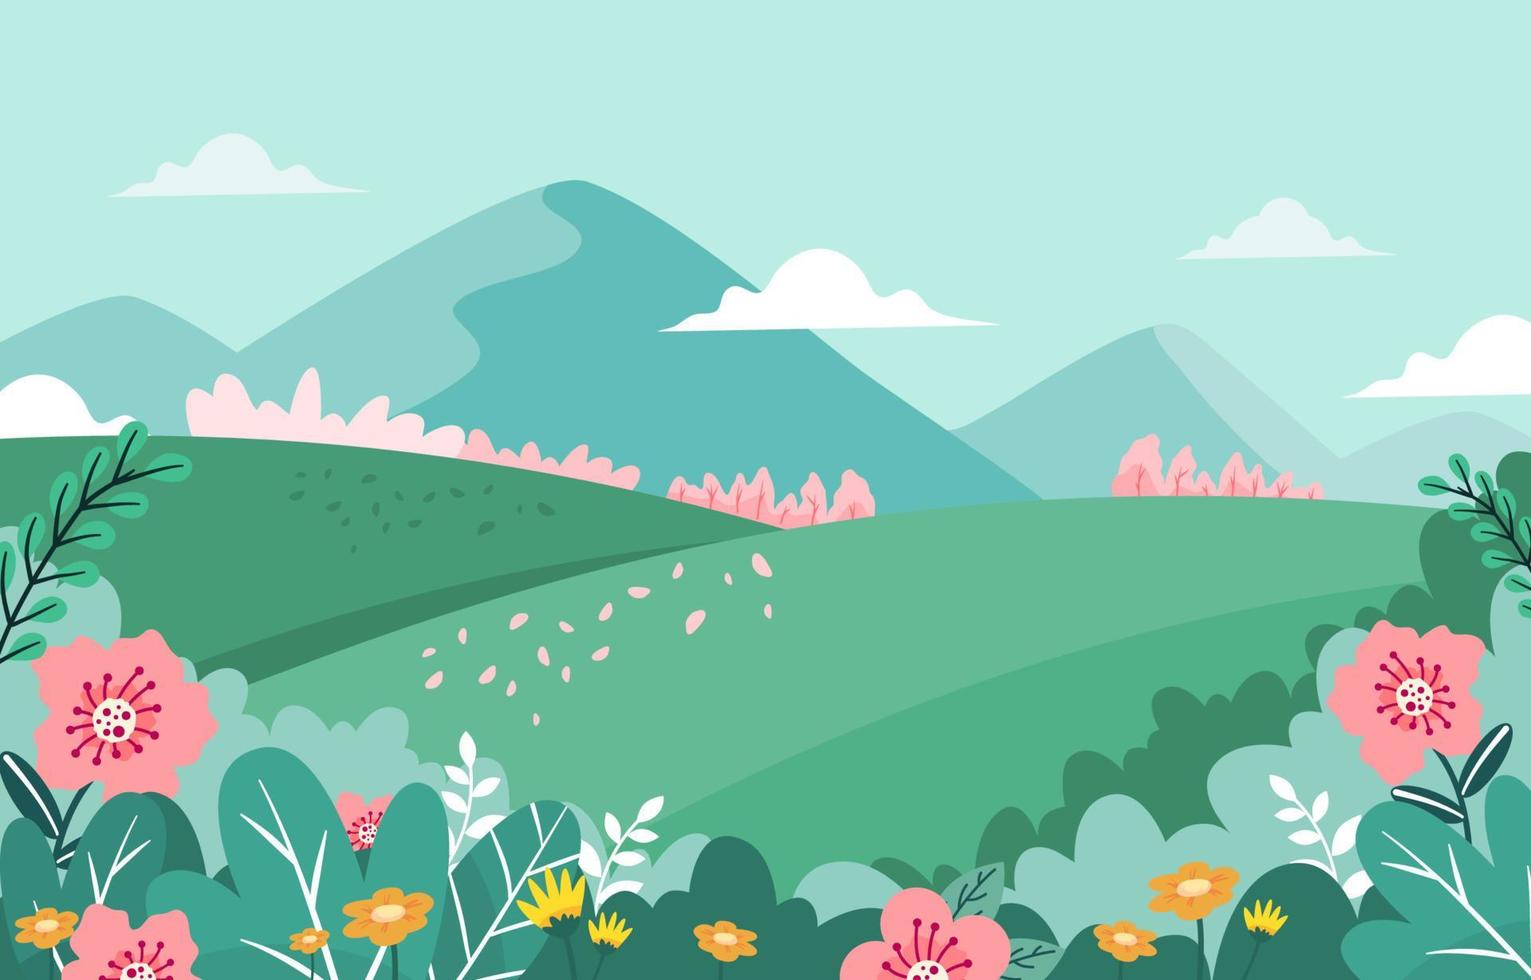 Background of Spring Scenery with Field and Mountain vector